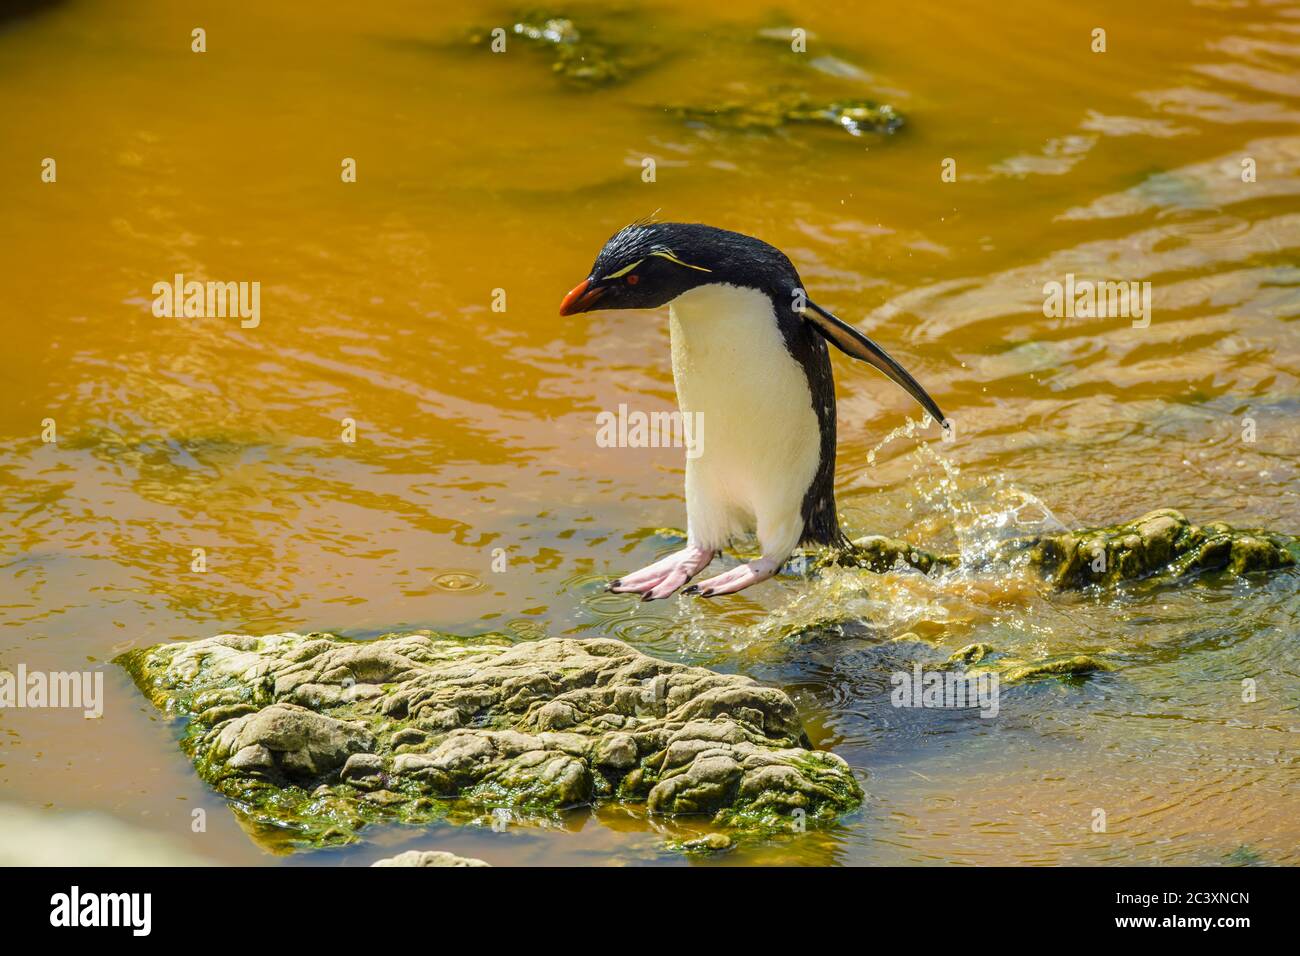 Southern rockhopper penguin, Eudyptes chrysocome,  In fresh water pool after emerging from ocean, Cape Bougainville, East Falkland, Falkland Islands Stock Photo